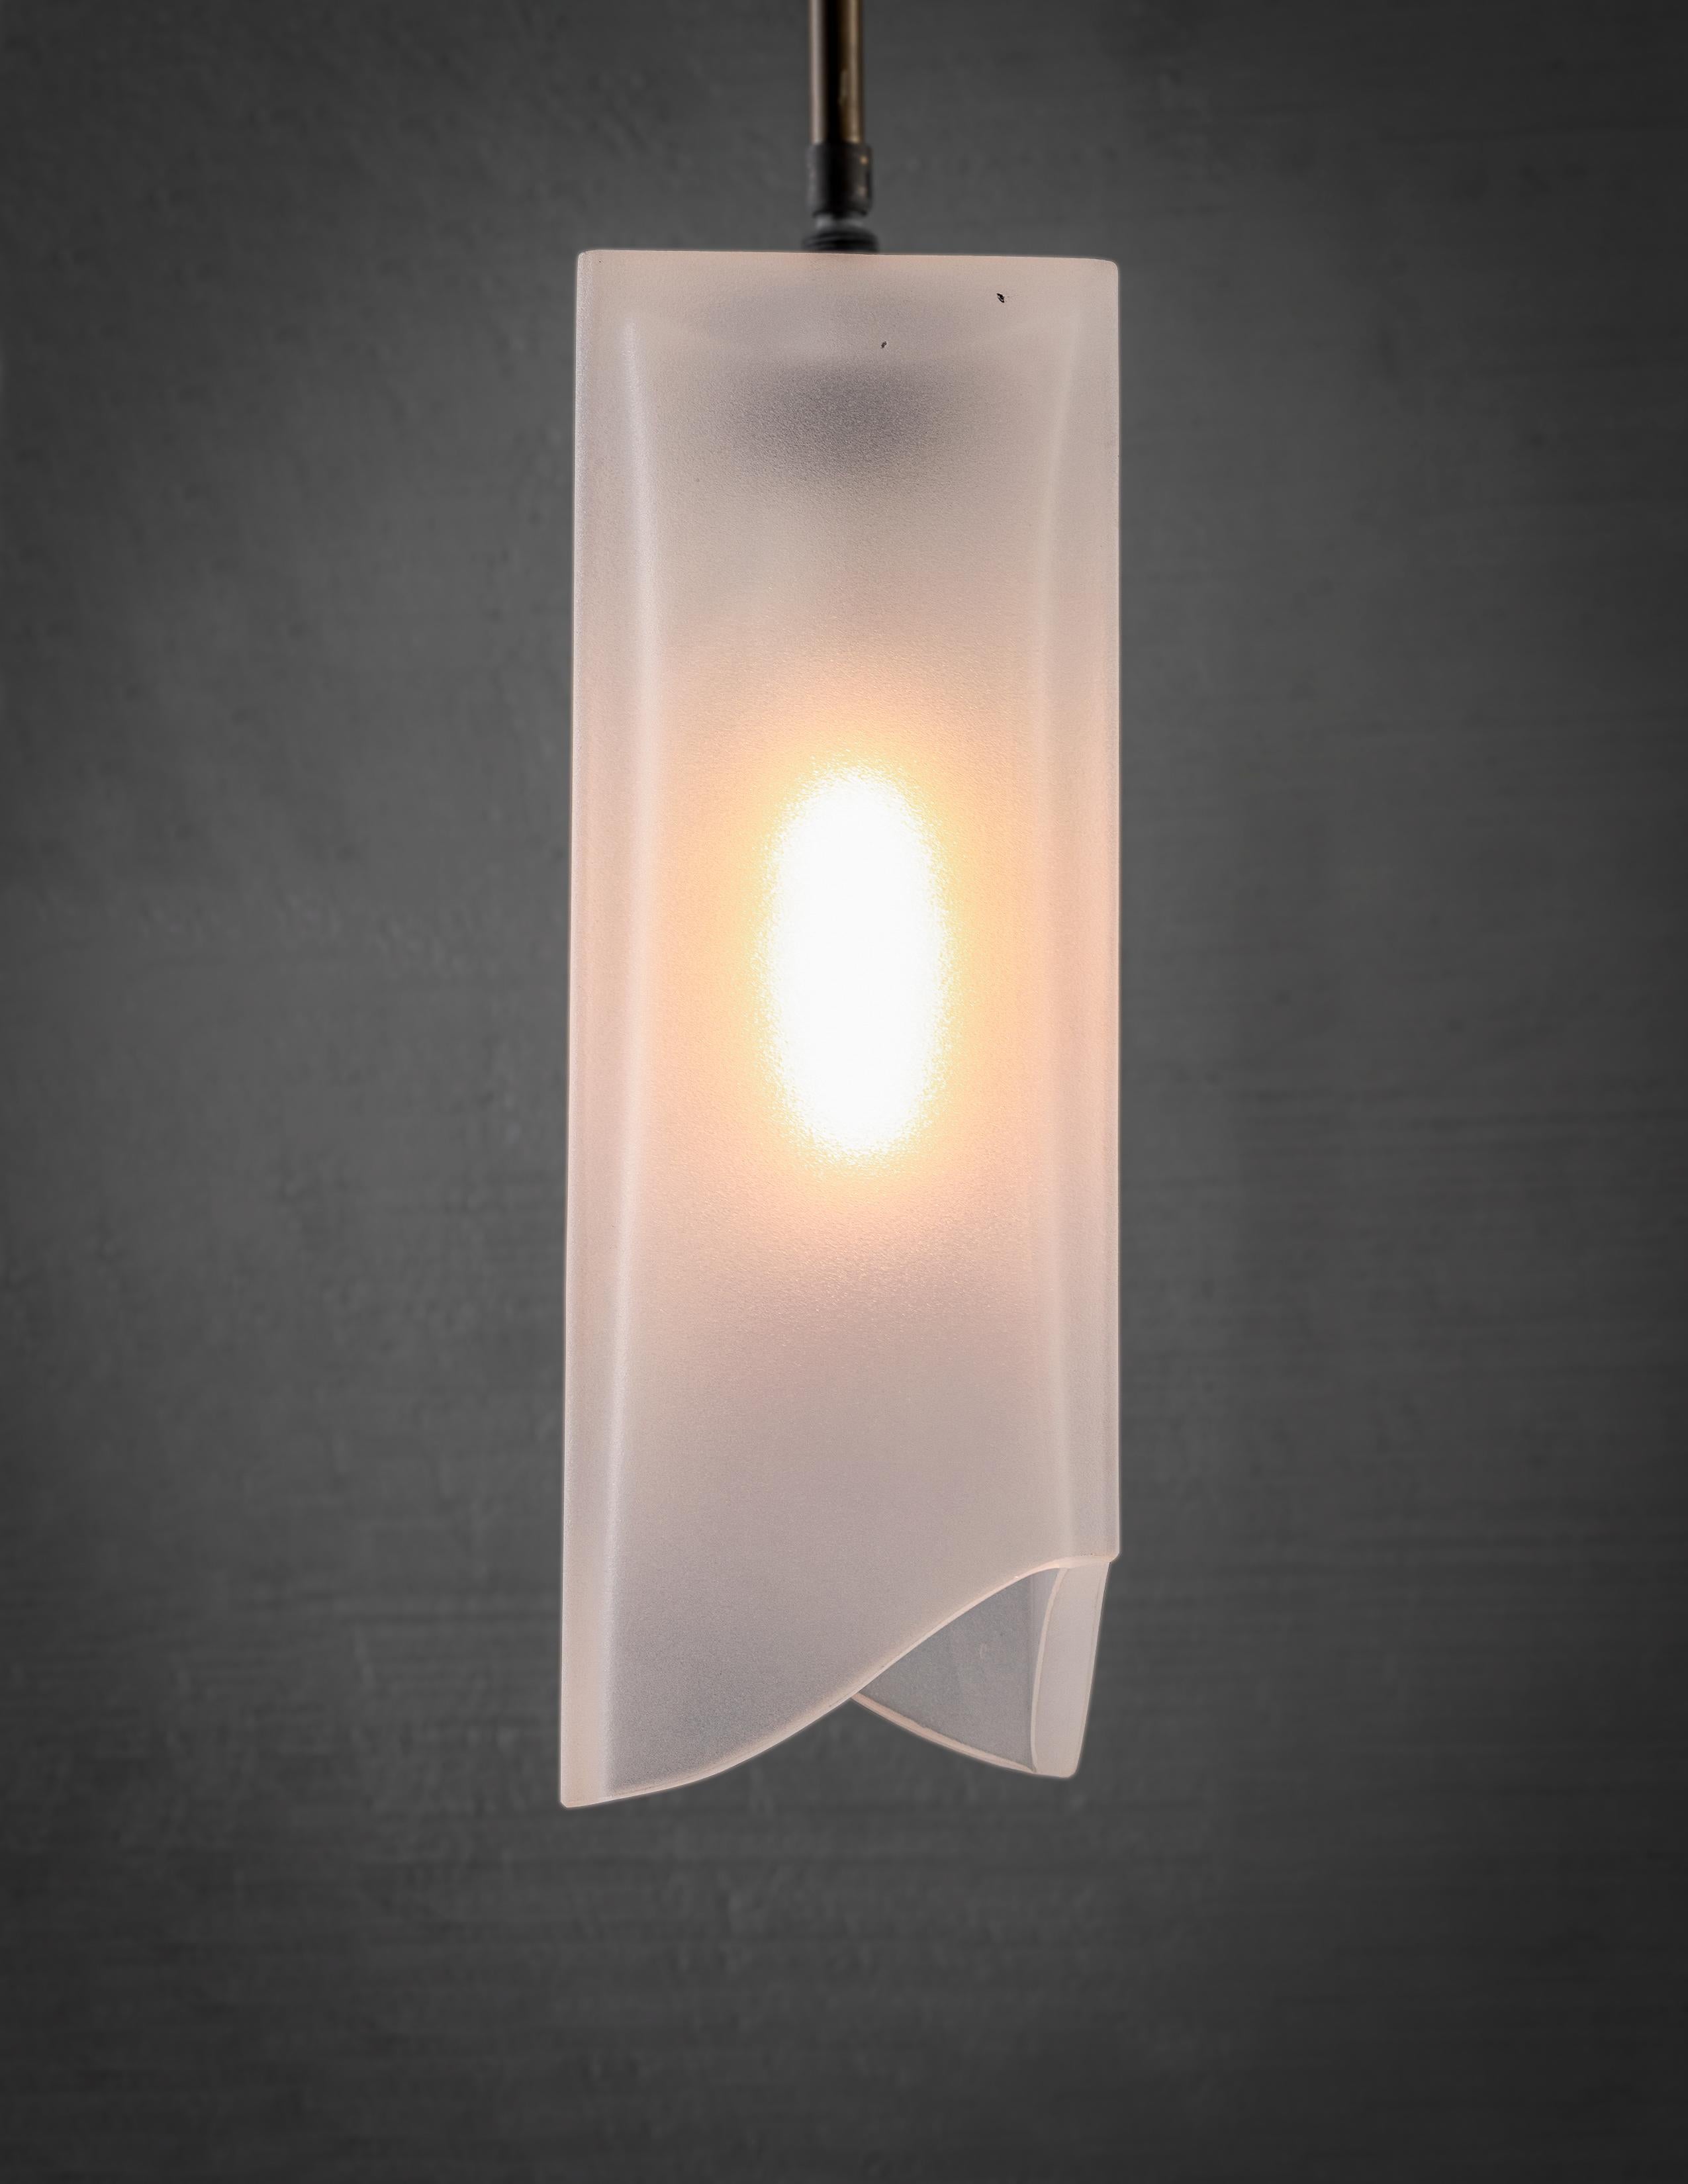 Artisanal crystal, sand finish.

Bulb 1x medium base 60 watt incandescent. 5 lbs.

Handcrafted in Italy. Sold exclusively at Brendan Bass.

Minimum hanging height: N/A
Maximum hanging height: 63